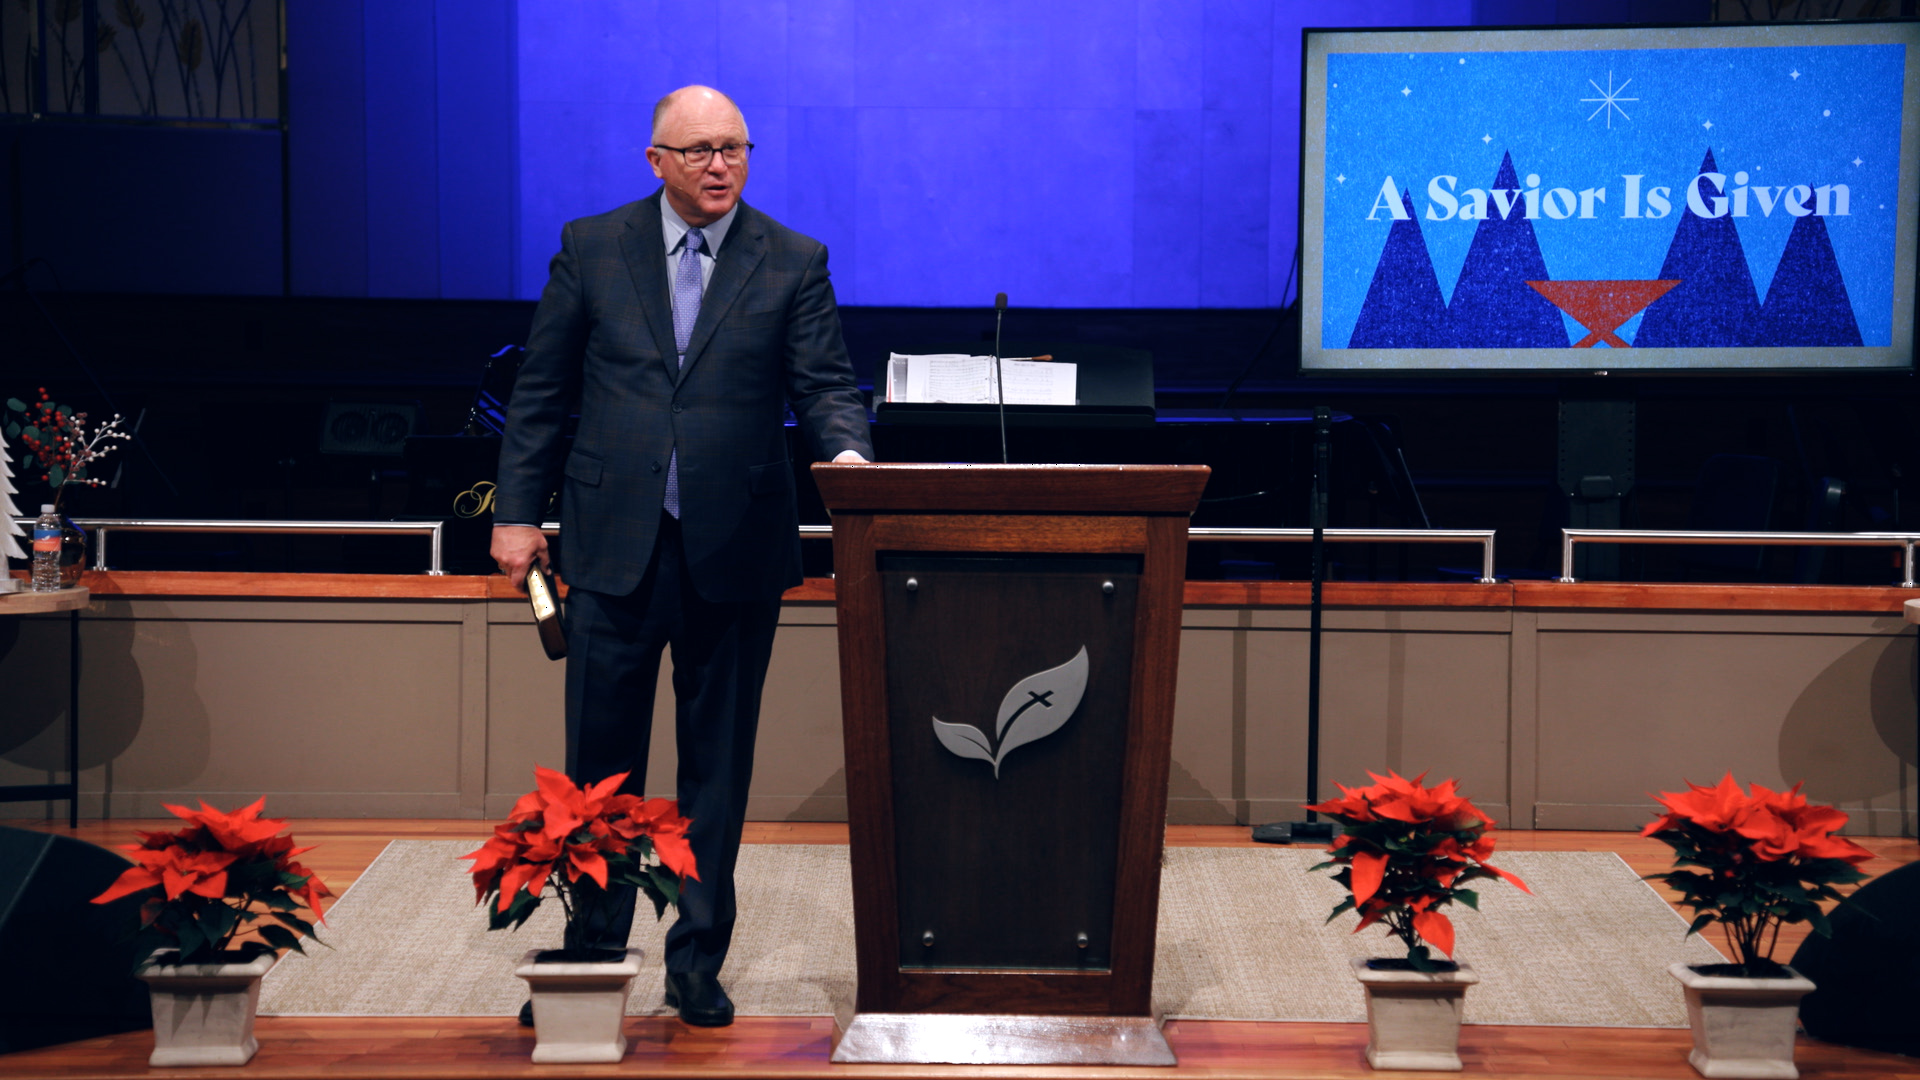 Pastor Paul Chappell: A Savior Proclaimed